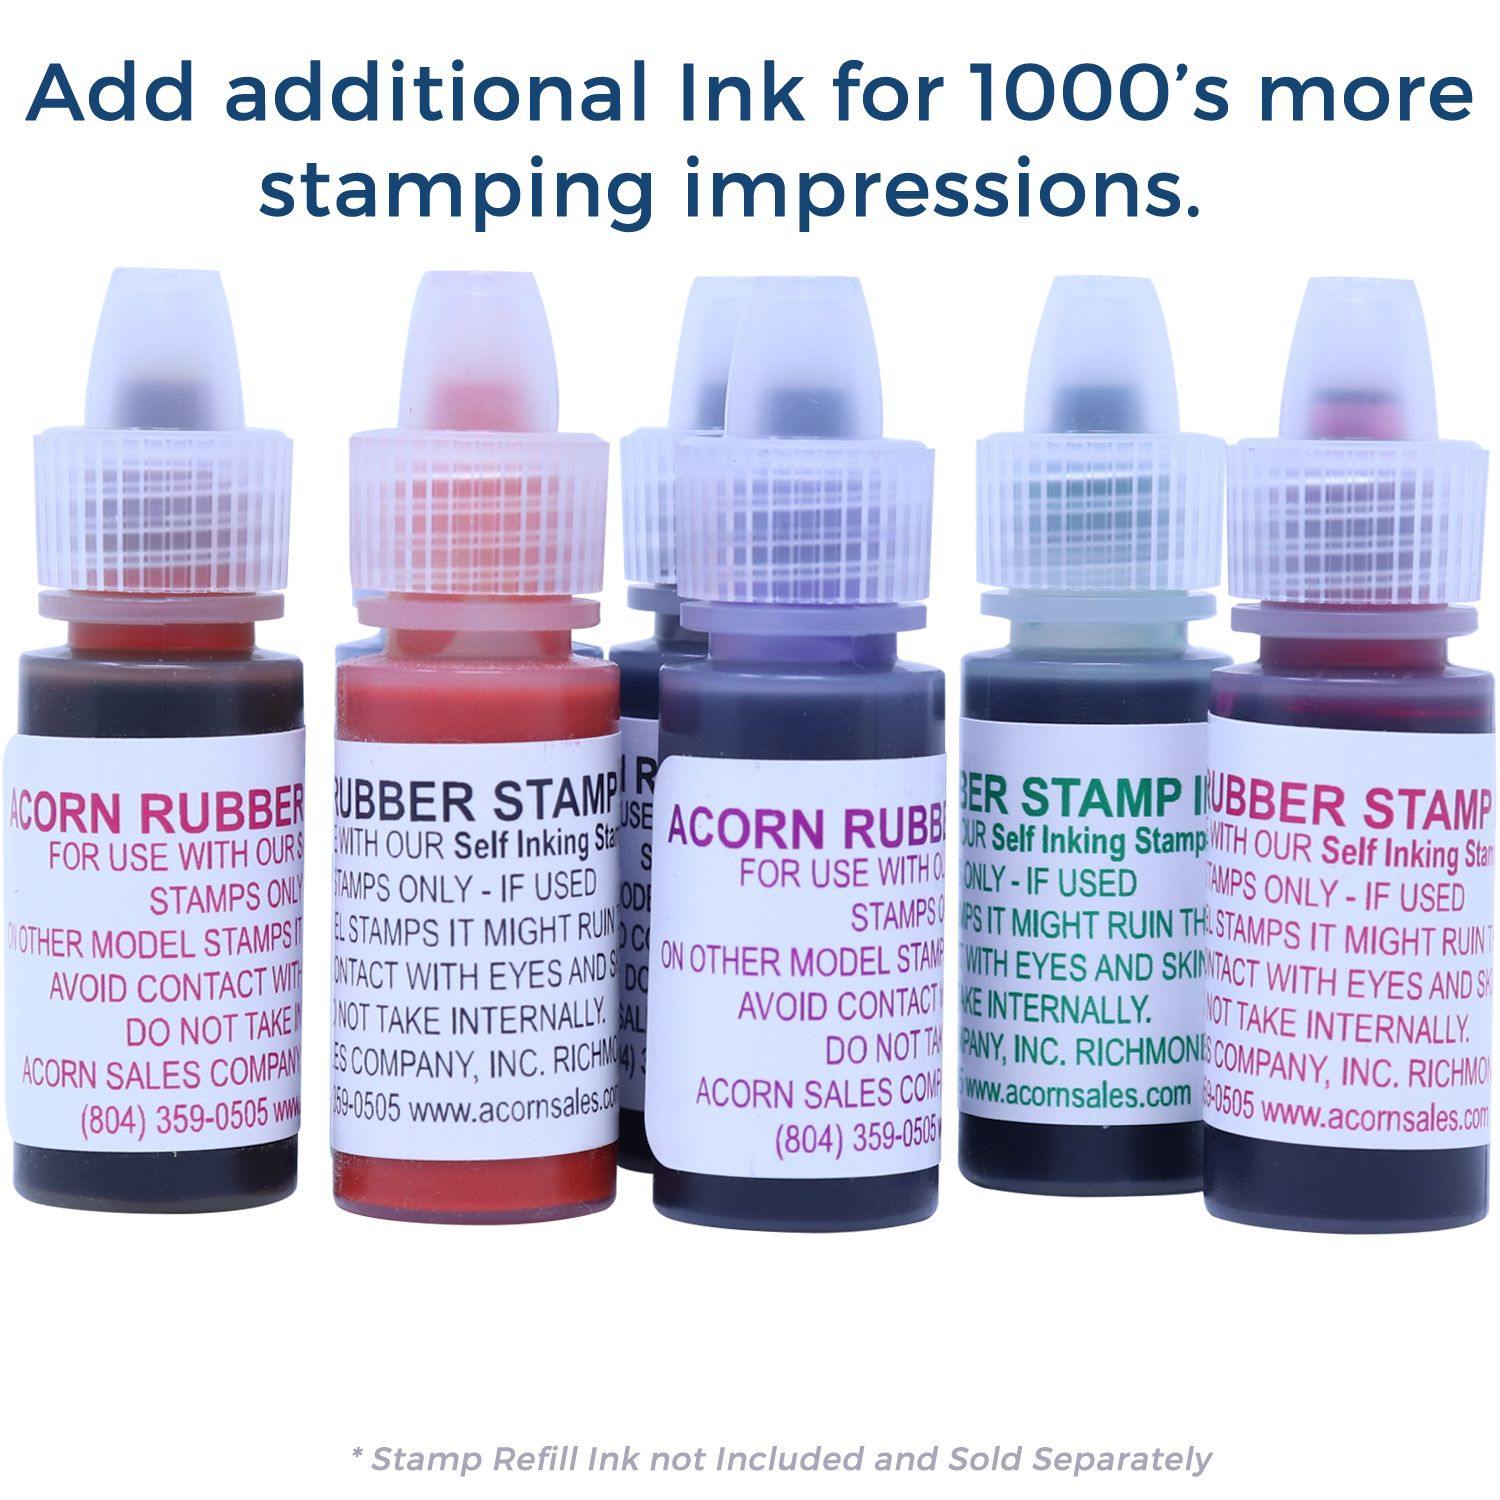 Refill Inks for Large Pre-Inked Bold Copy Stamp Available